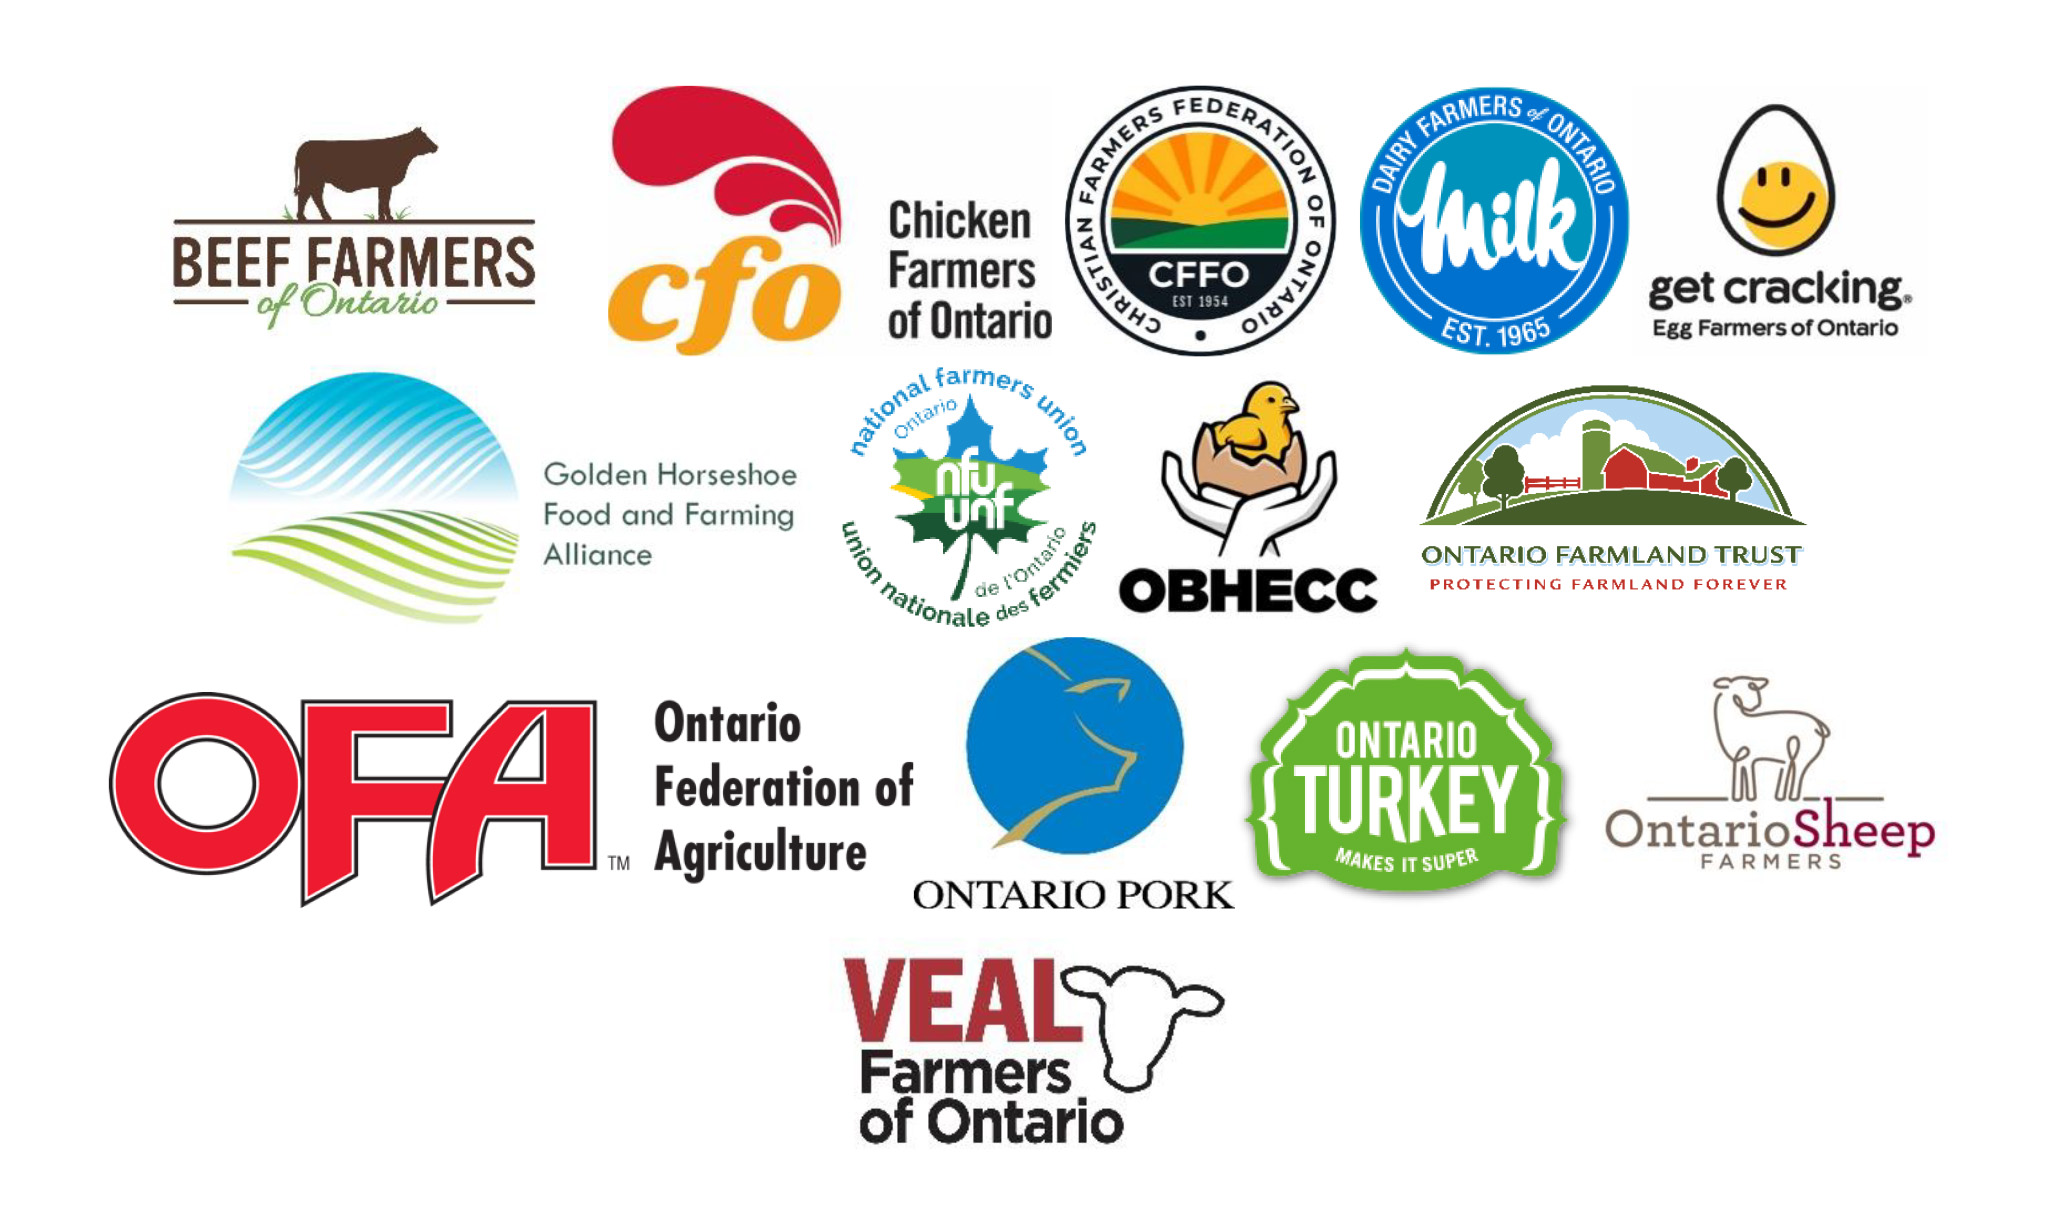 Ontario’s Farm Leaders & Ontario Gov Find Common Ground Re: Proposed PPS